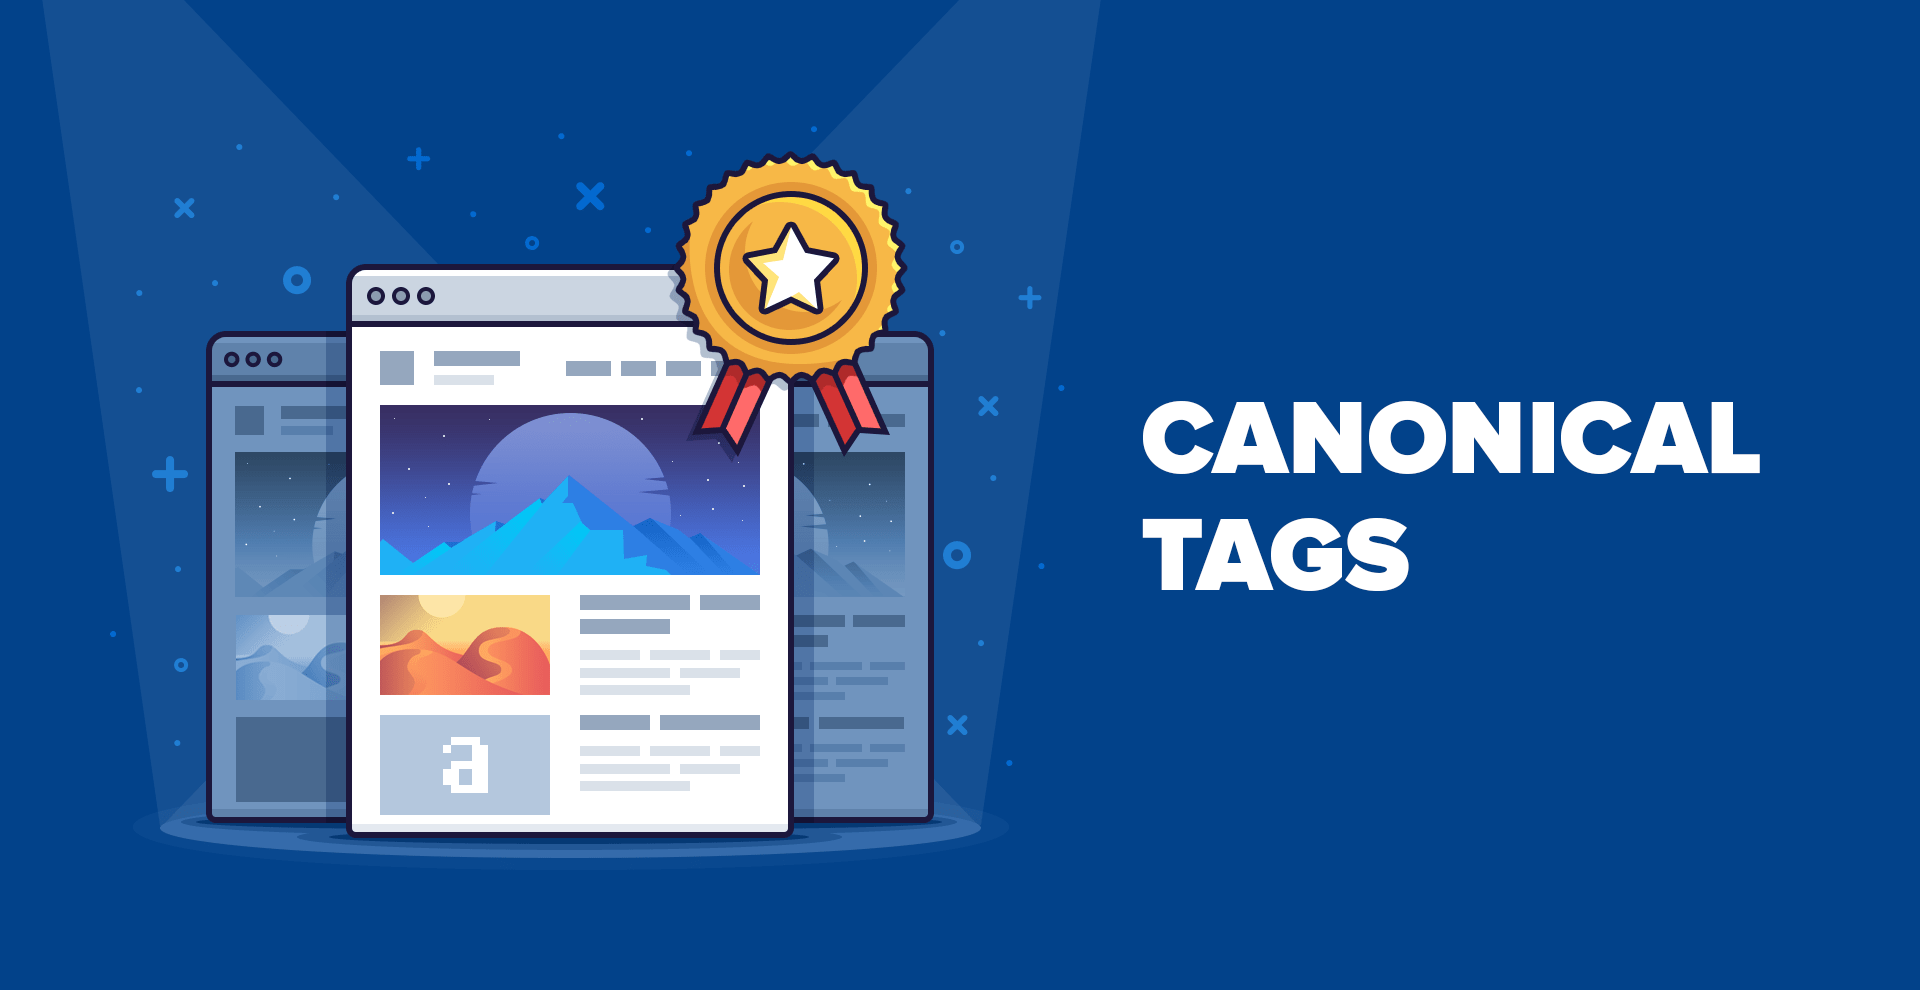 fb-canonical-tags-1-2